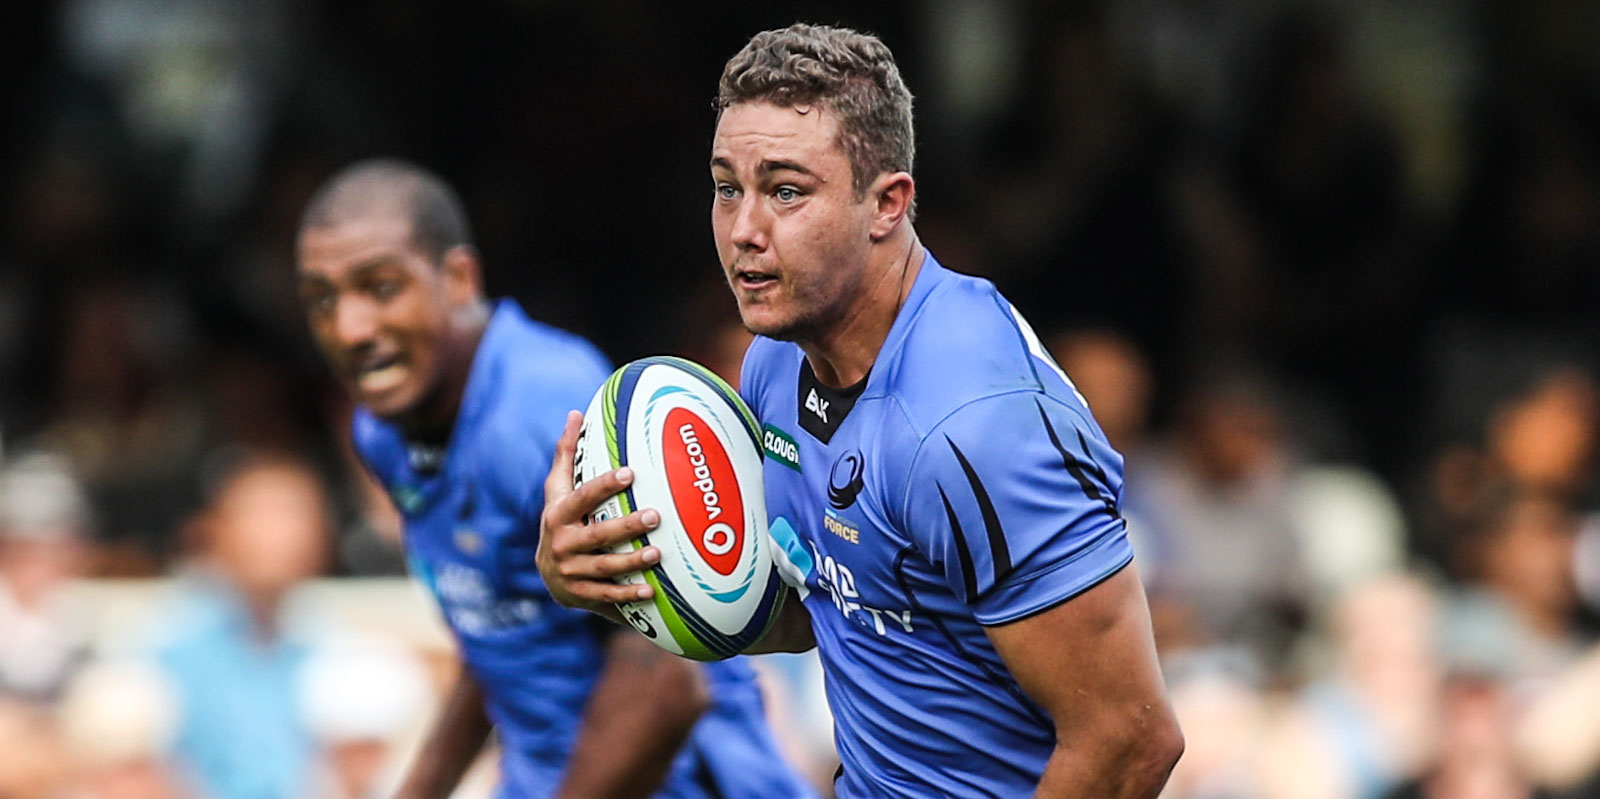 James Verity-Amm in action for the Western Force in 2017.